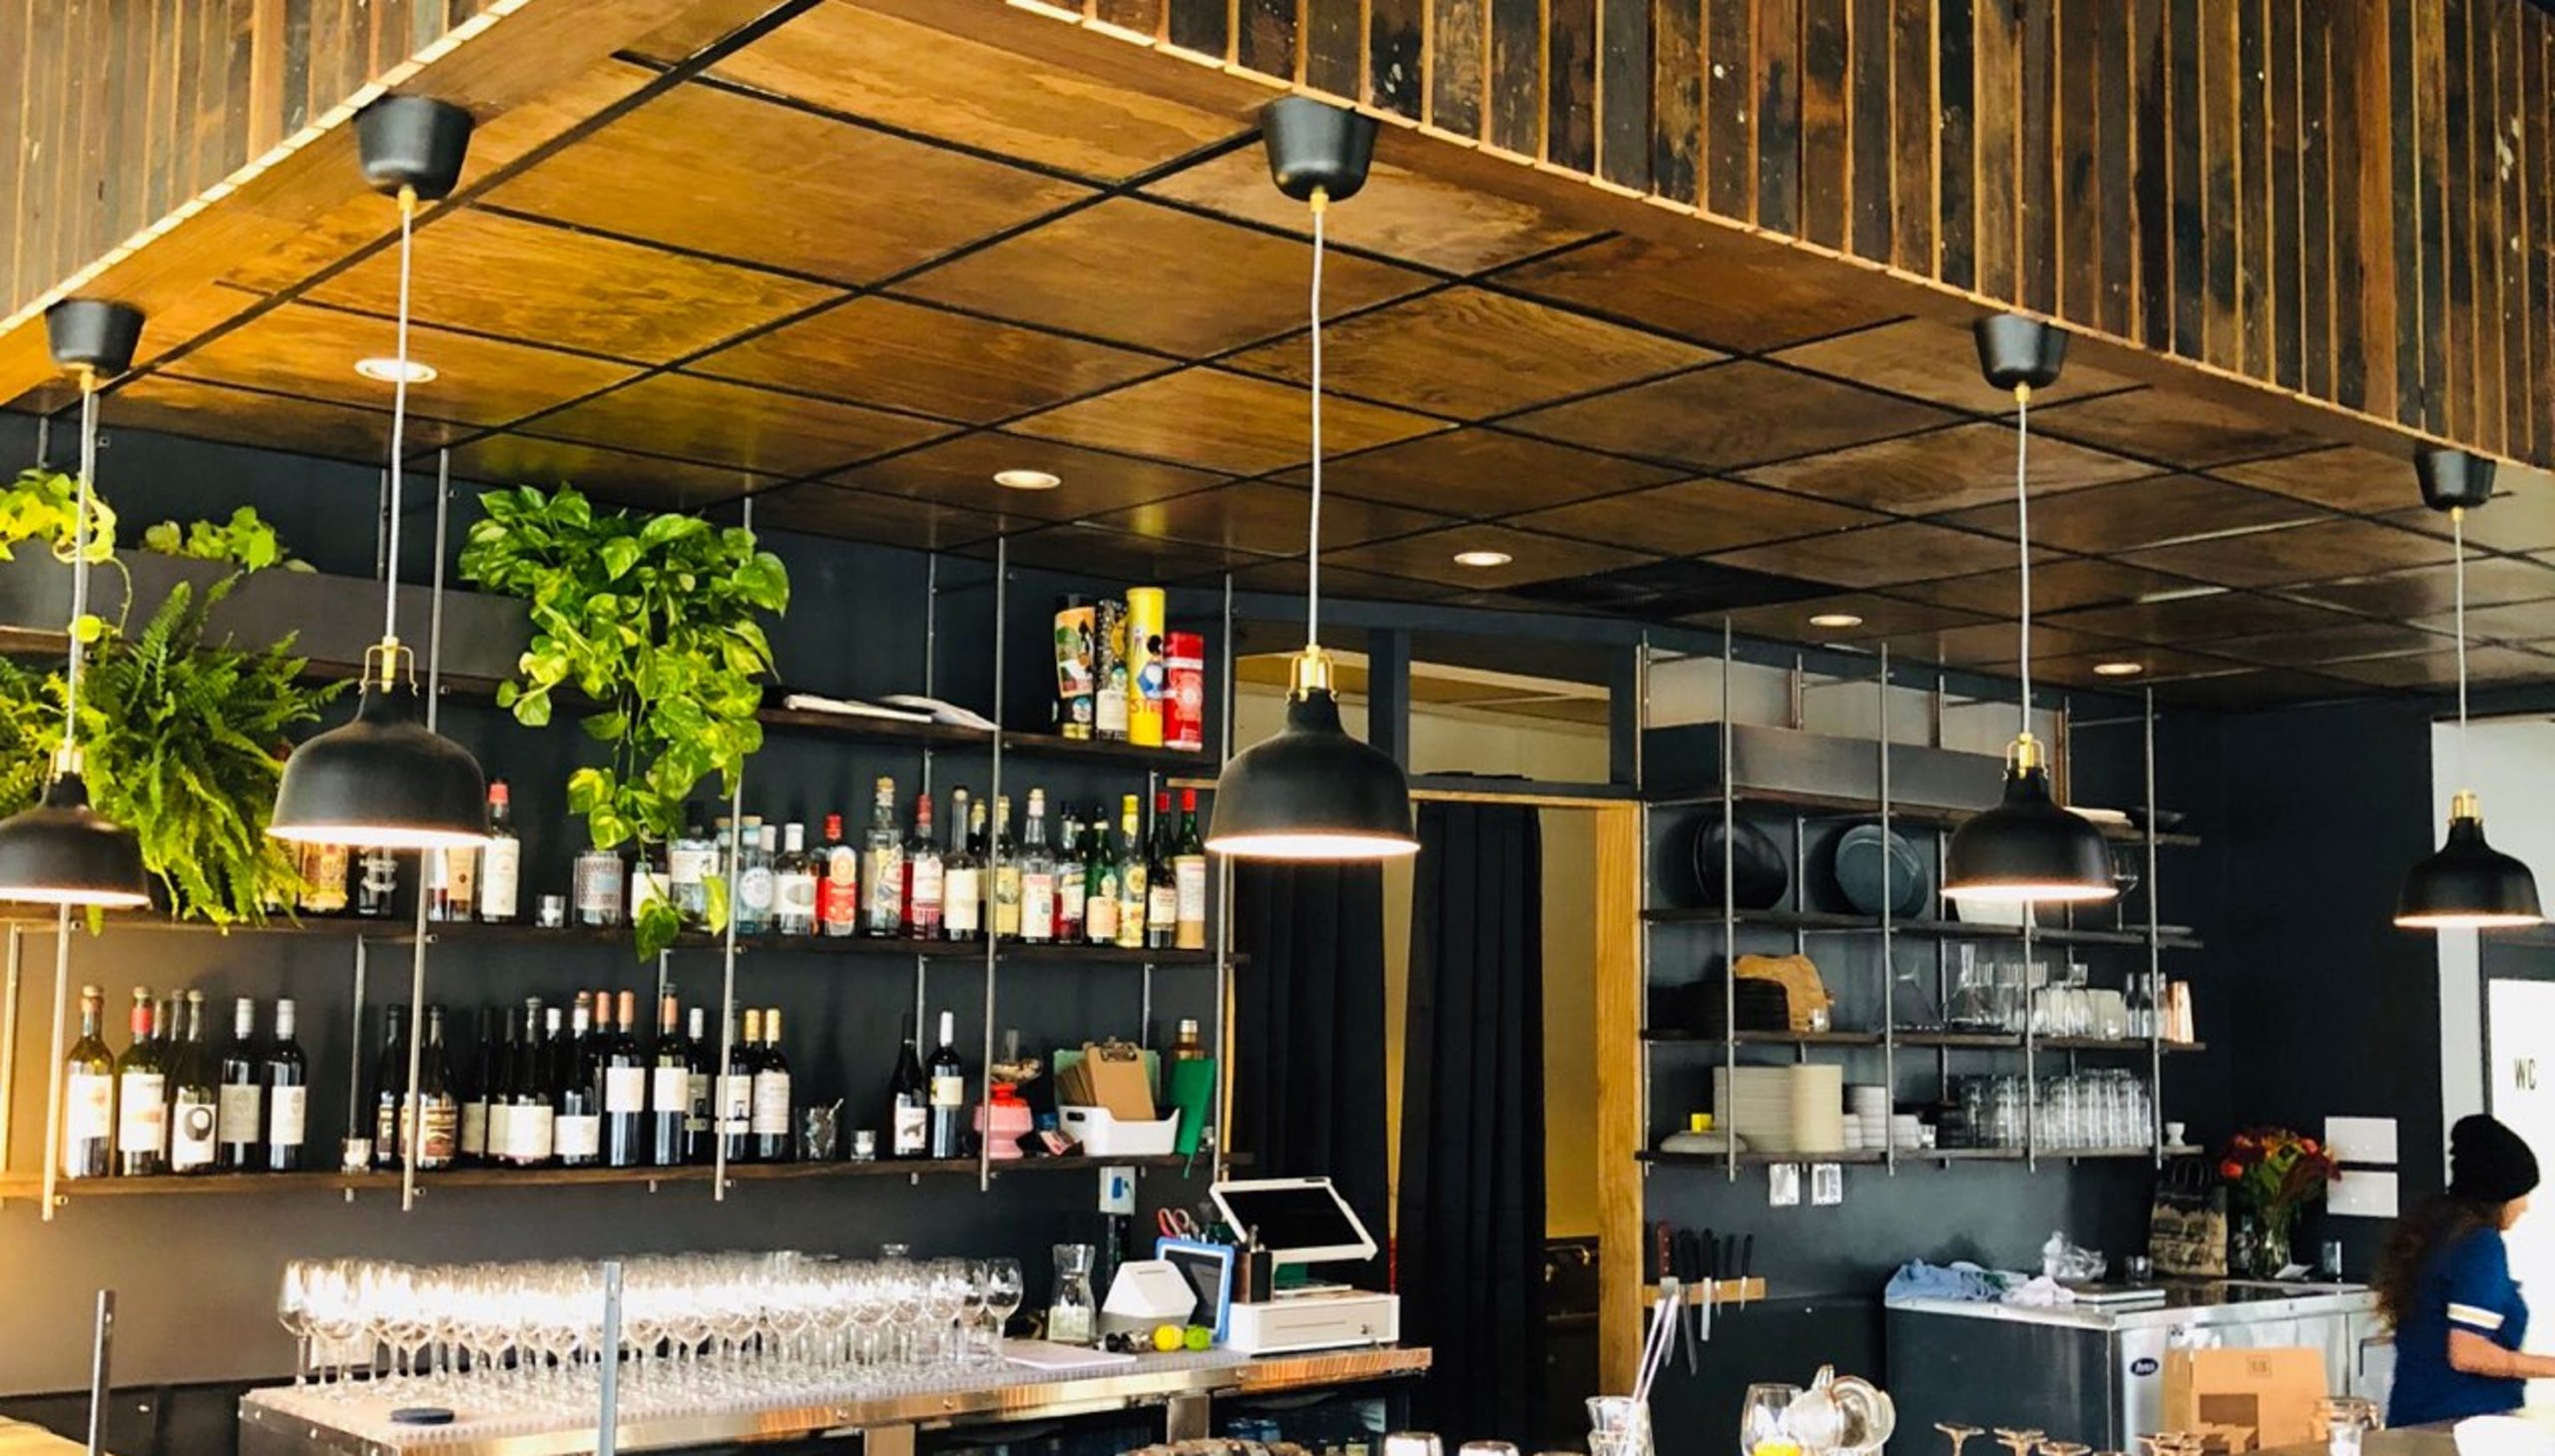 Pop the cork: Voyager wine bar is open in Bay View